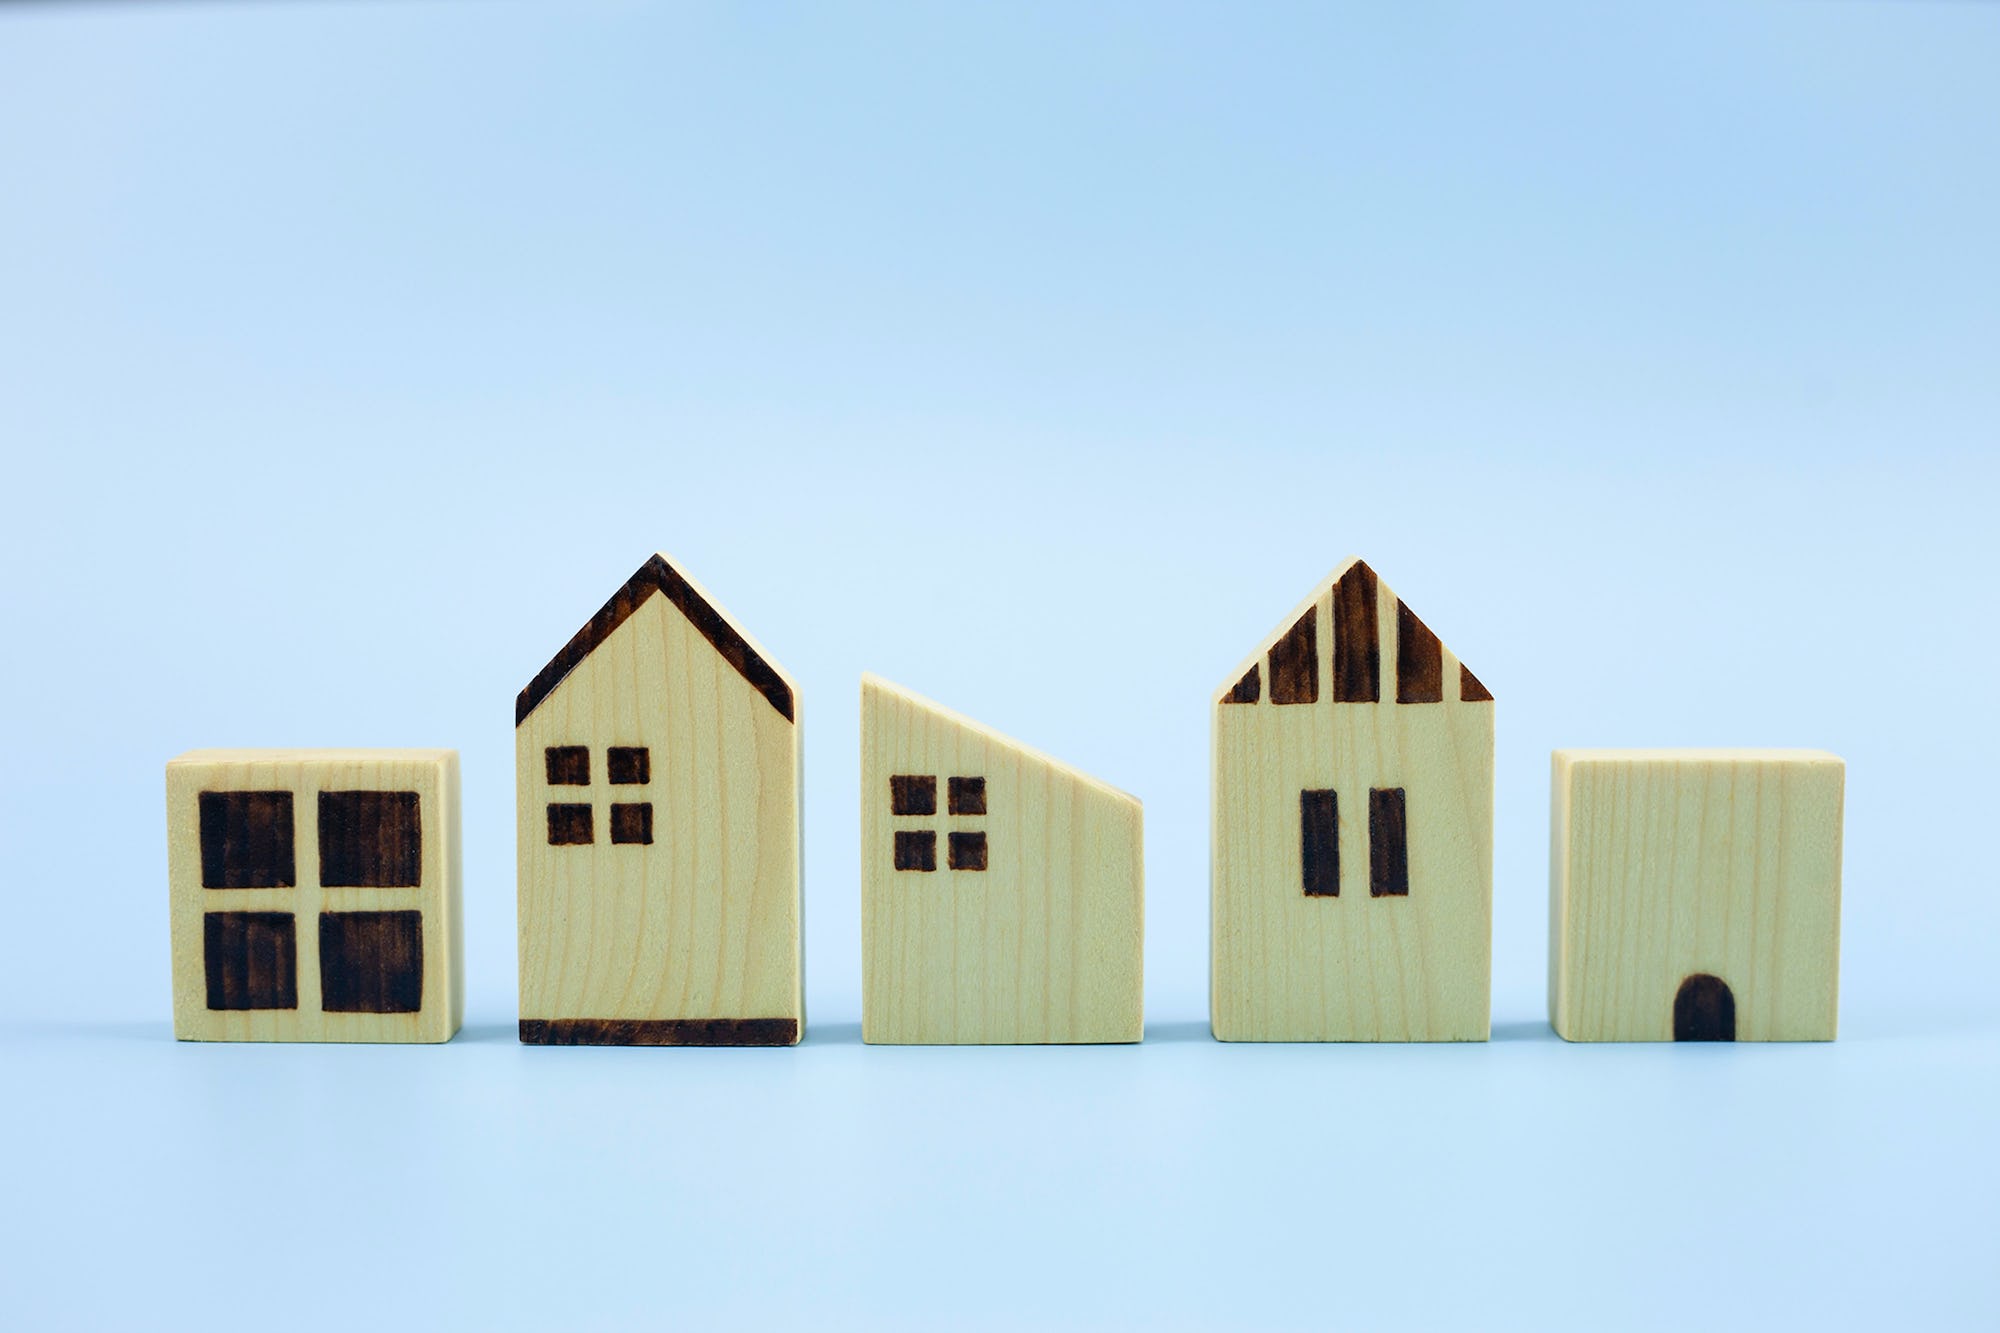 Display of small wooden houses in a row of all different shapes and sizes, reflecting diverse community of homeowners and renters